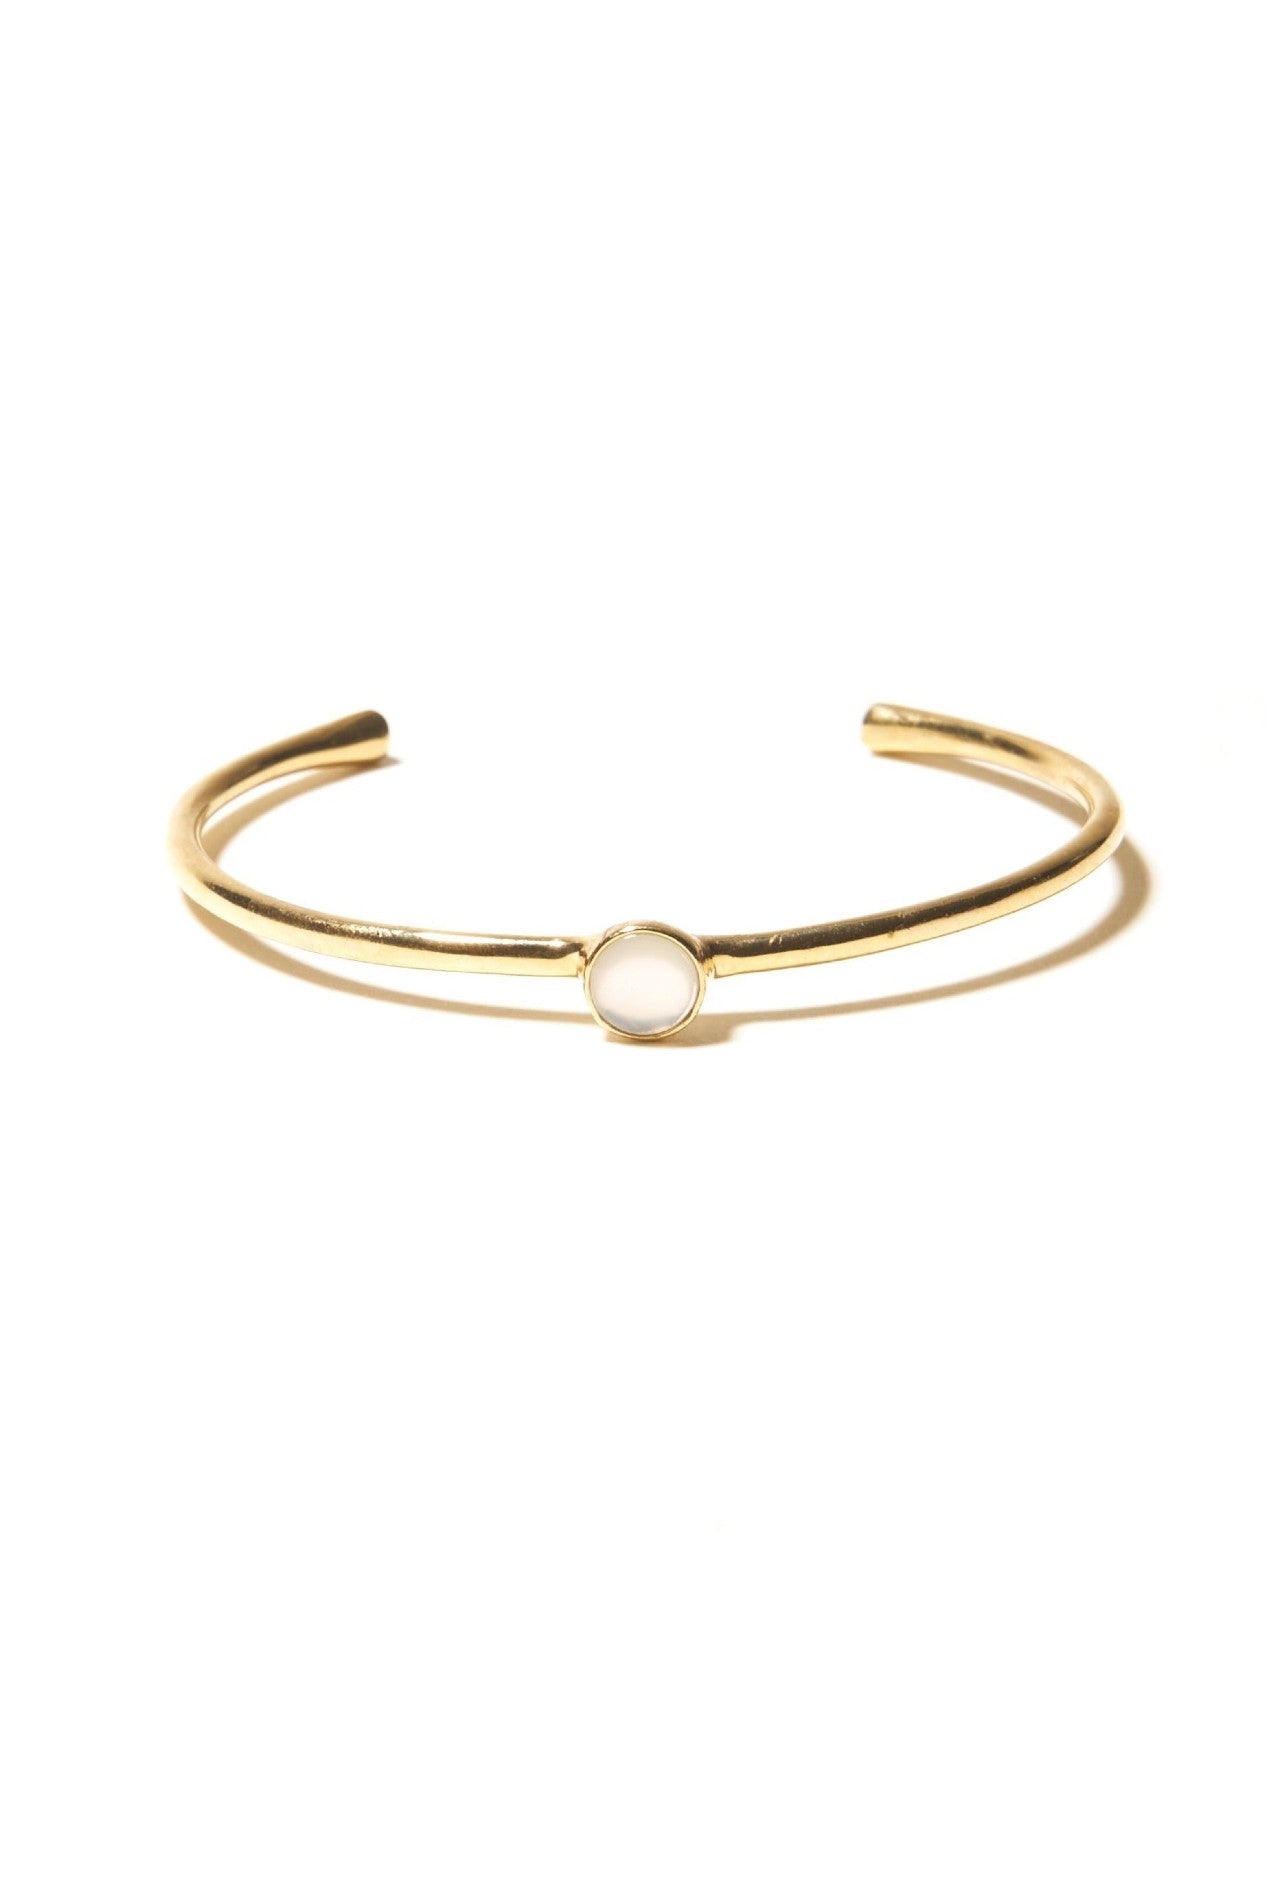 ODETTE NY Women's Sustainable Made in USA Jewelry Aura Sleek Recycled Brass Open Cuff with Mother of Pearl Detail